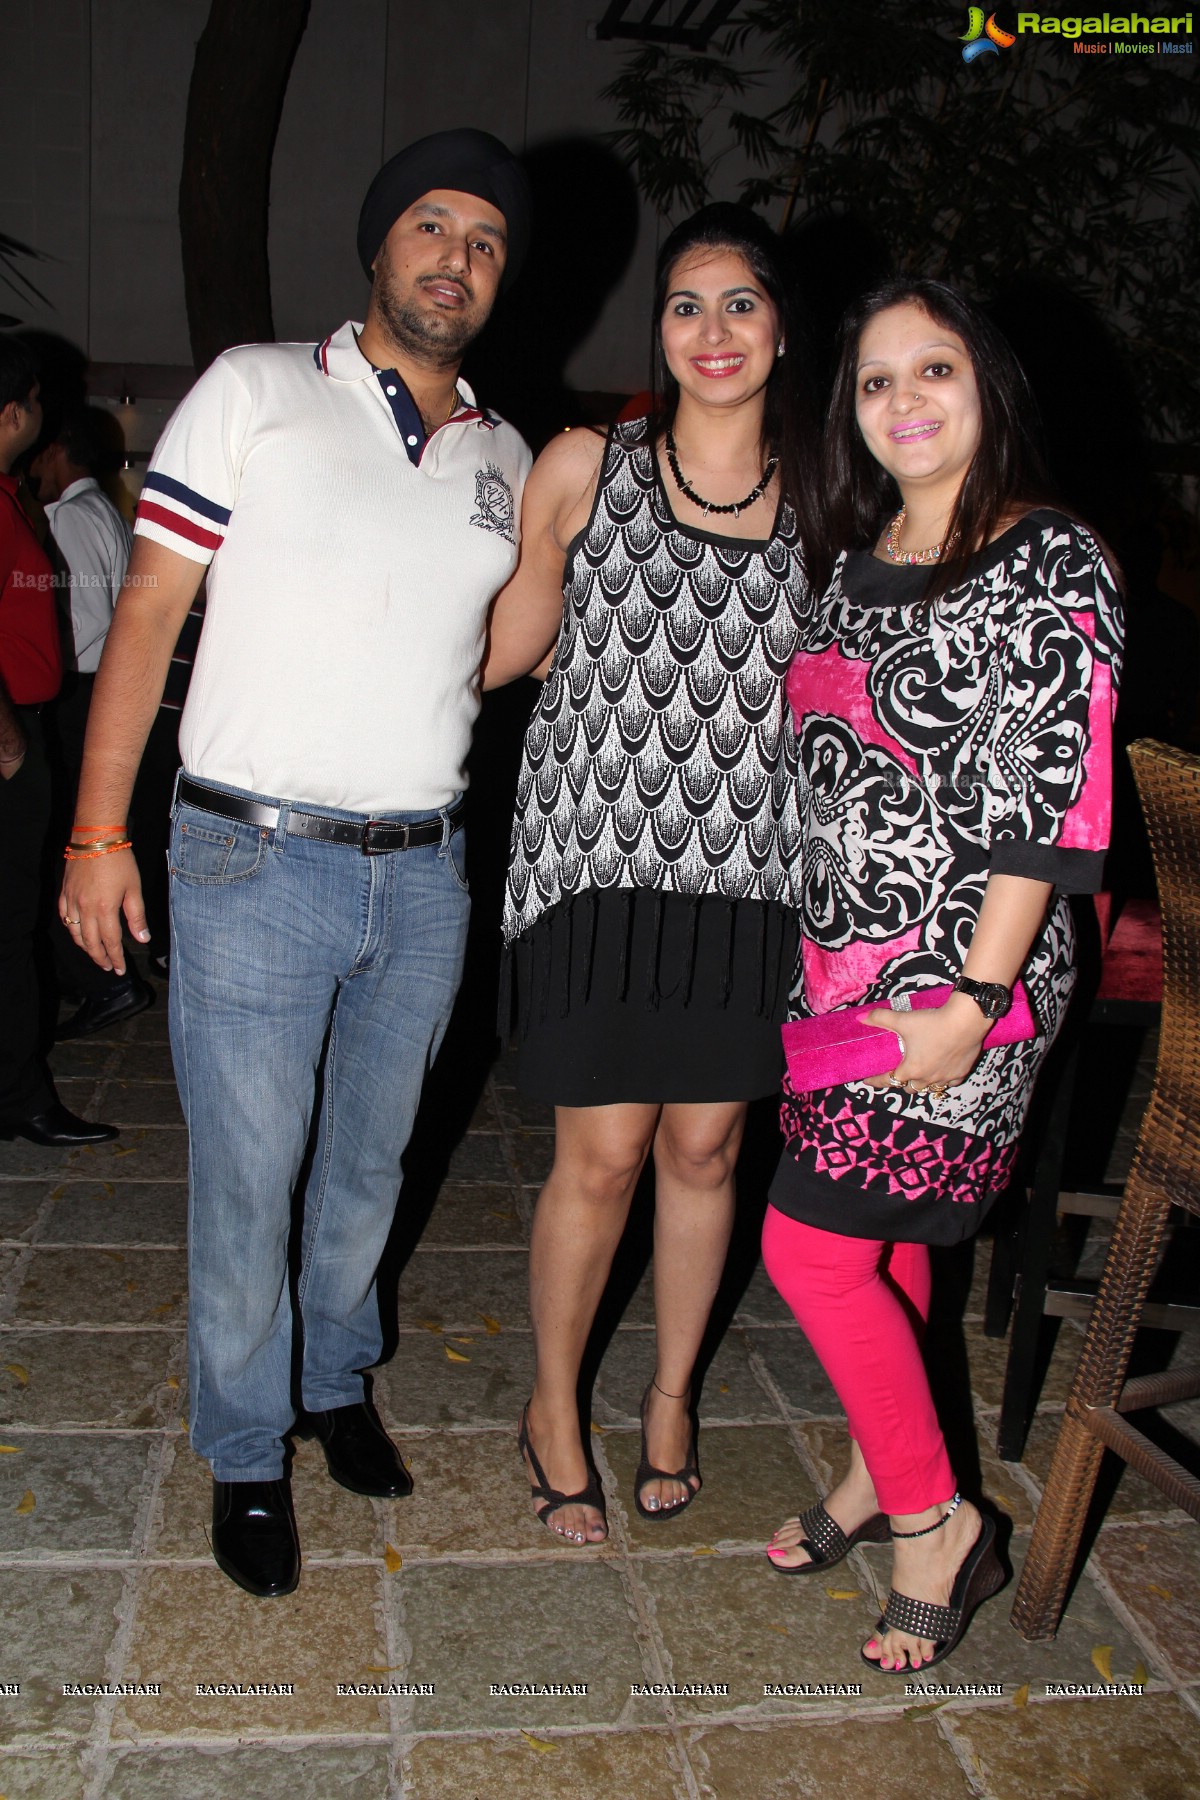 Sparks n Sizzles Party by Jitin and Rashleen Bajaj at N Asian, Hyderabad